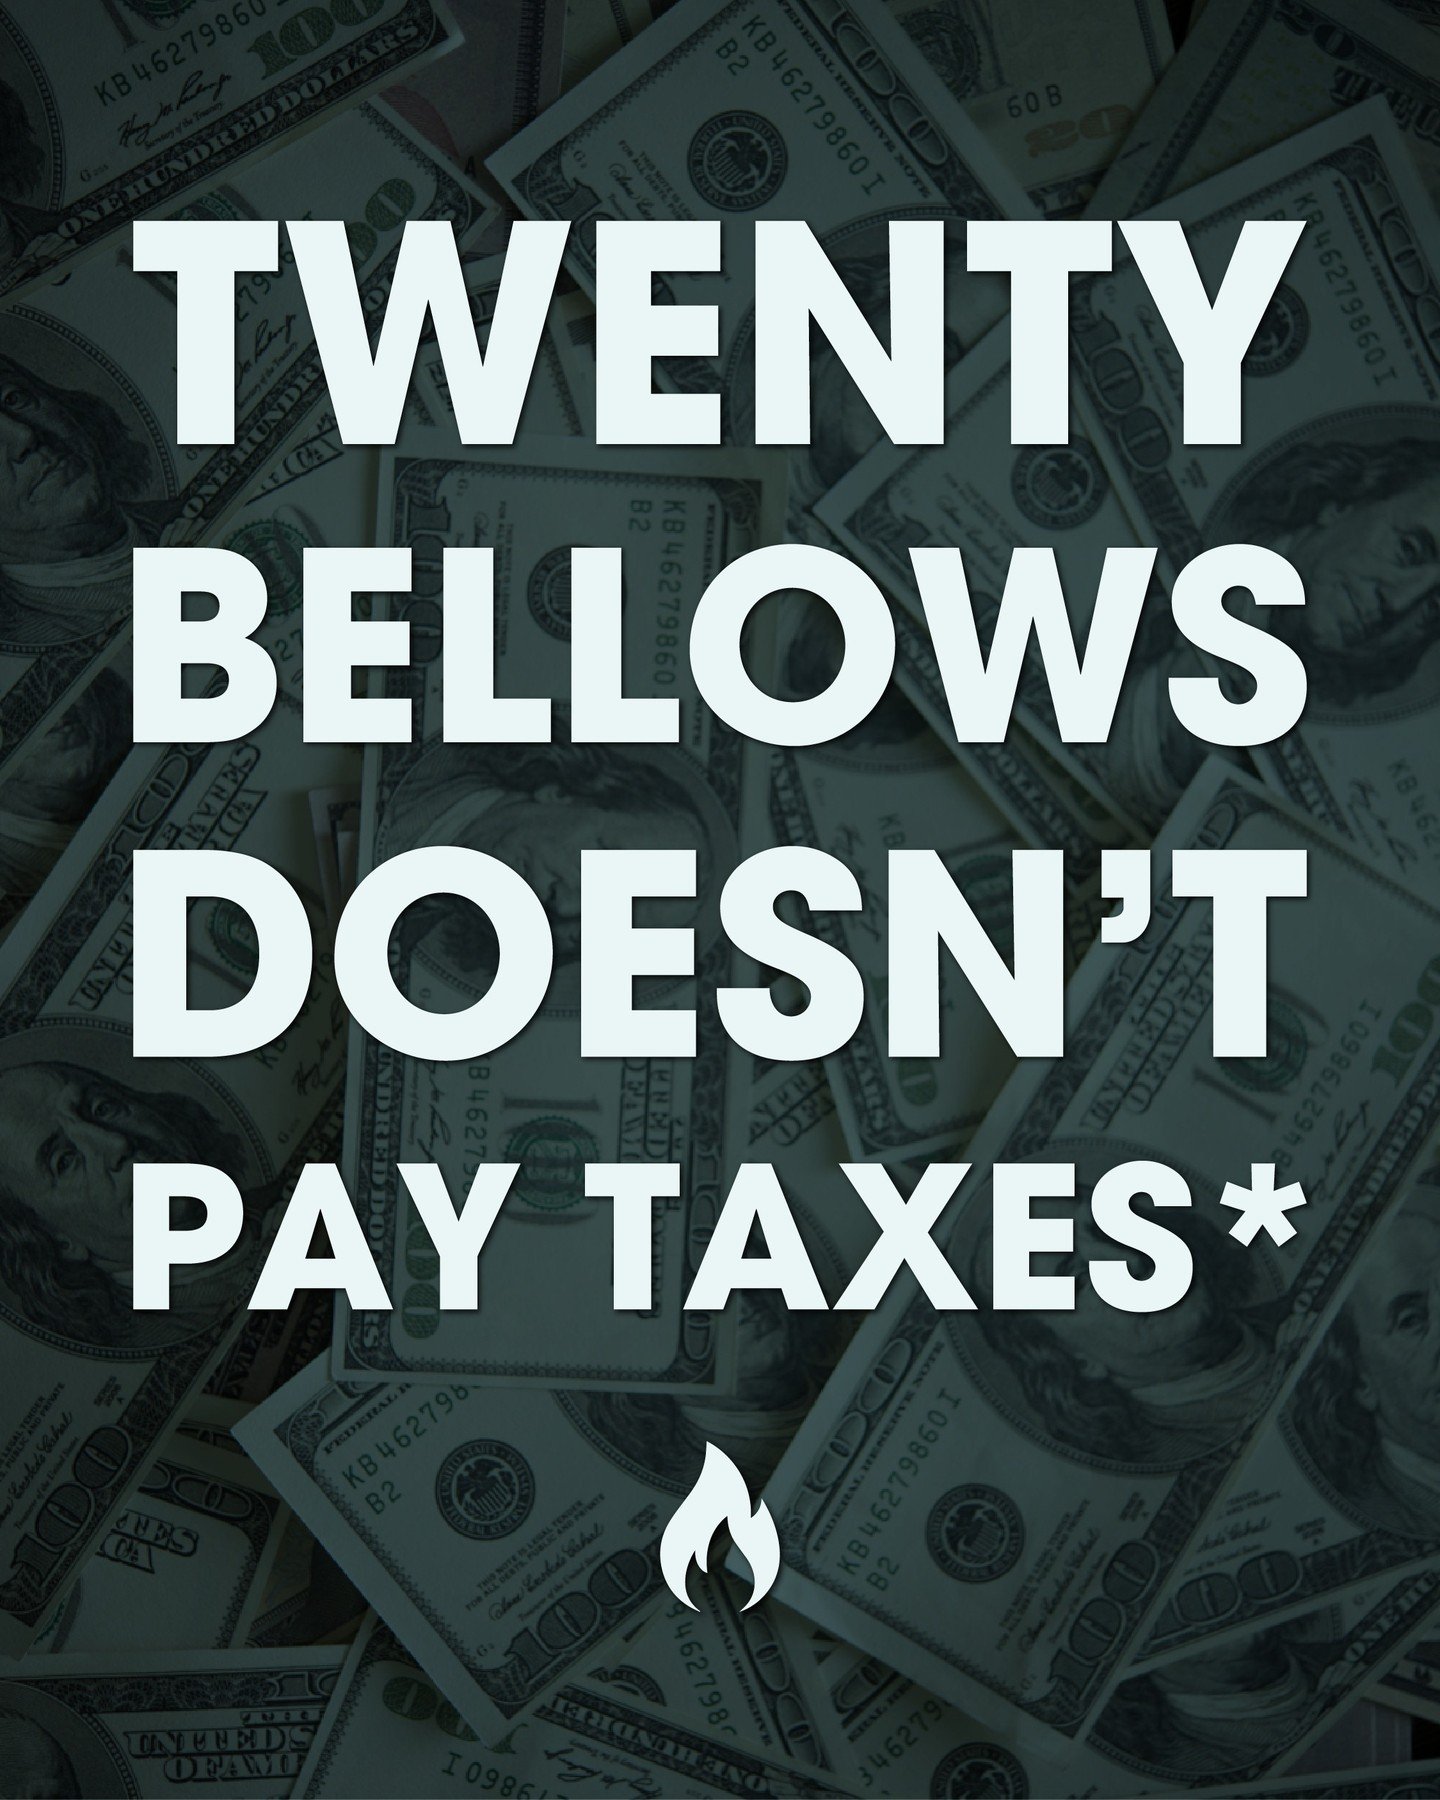 Did we get your attention? Good! Read on to learn why we didn't pay taxes this year.

*Twenty Bellows, LLC pays all applicable sales tax for every transaction and completes federal and state tax returns as required. 

~

It&rsquo;s Tax Day in America